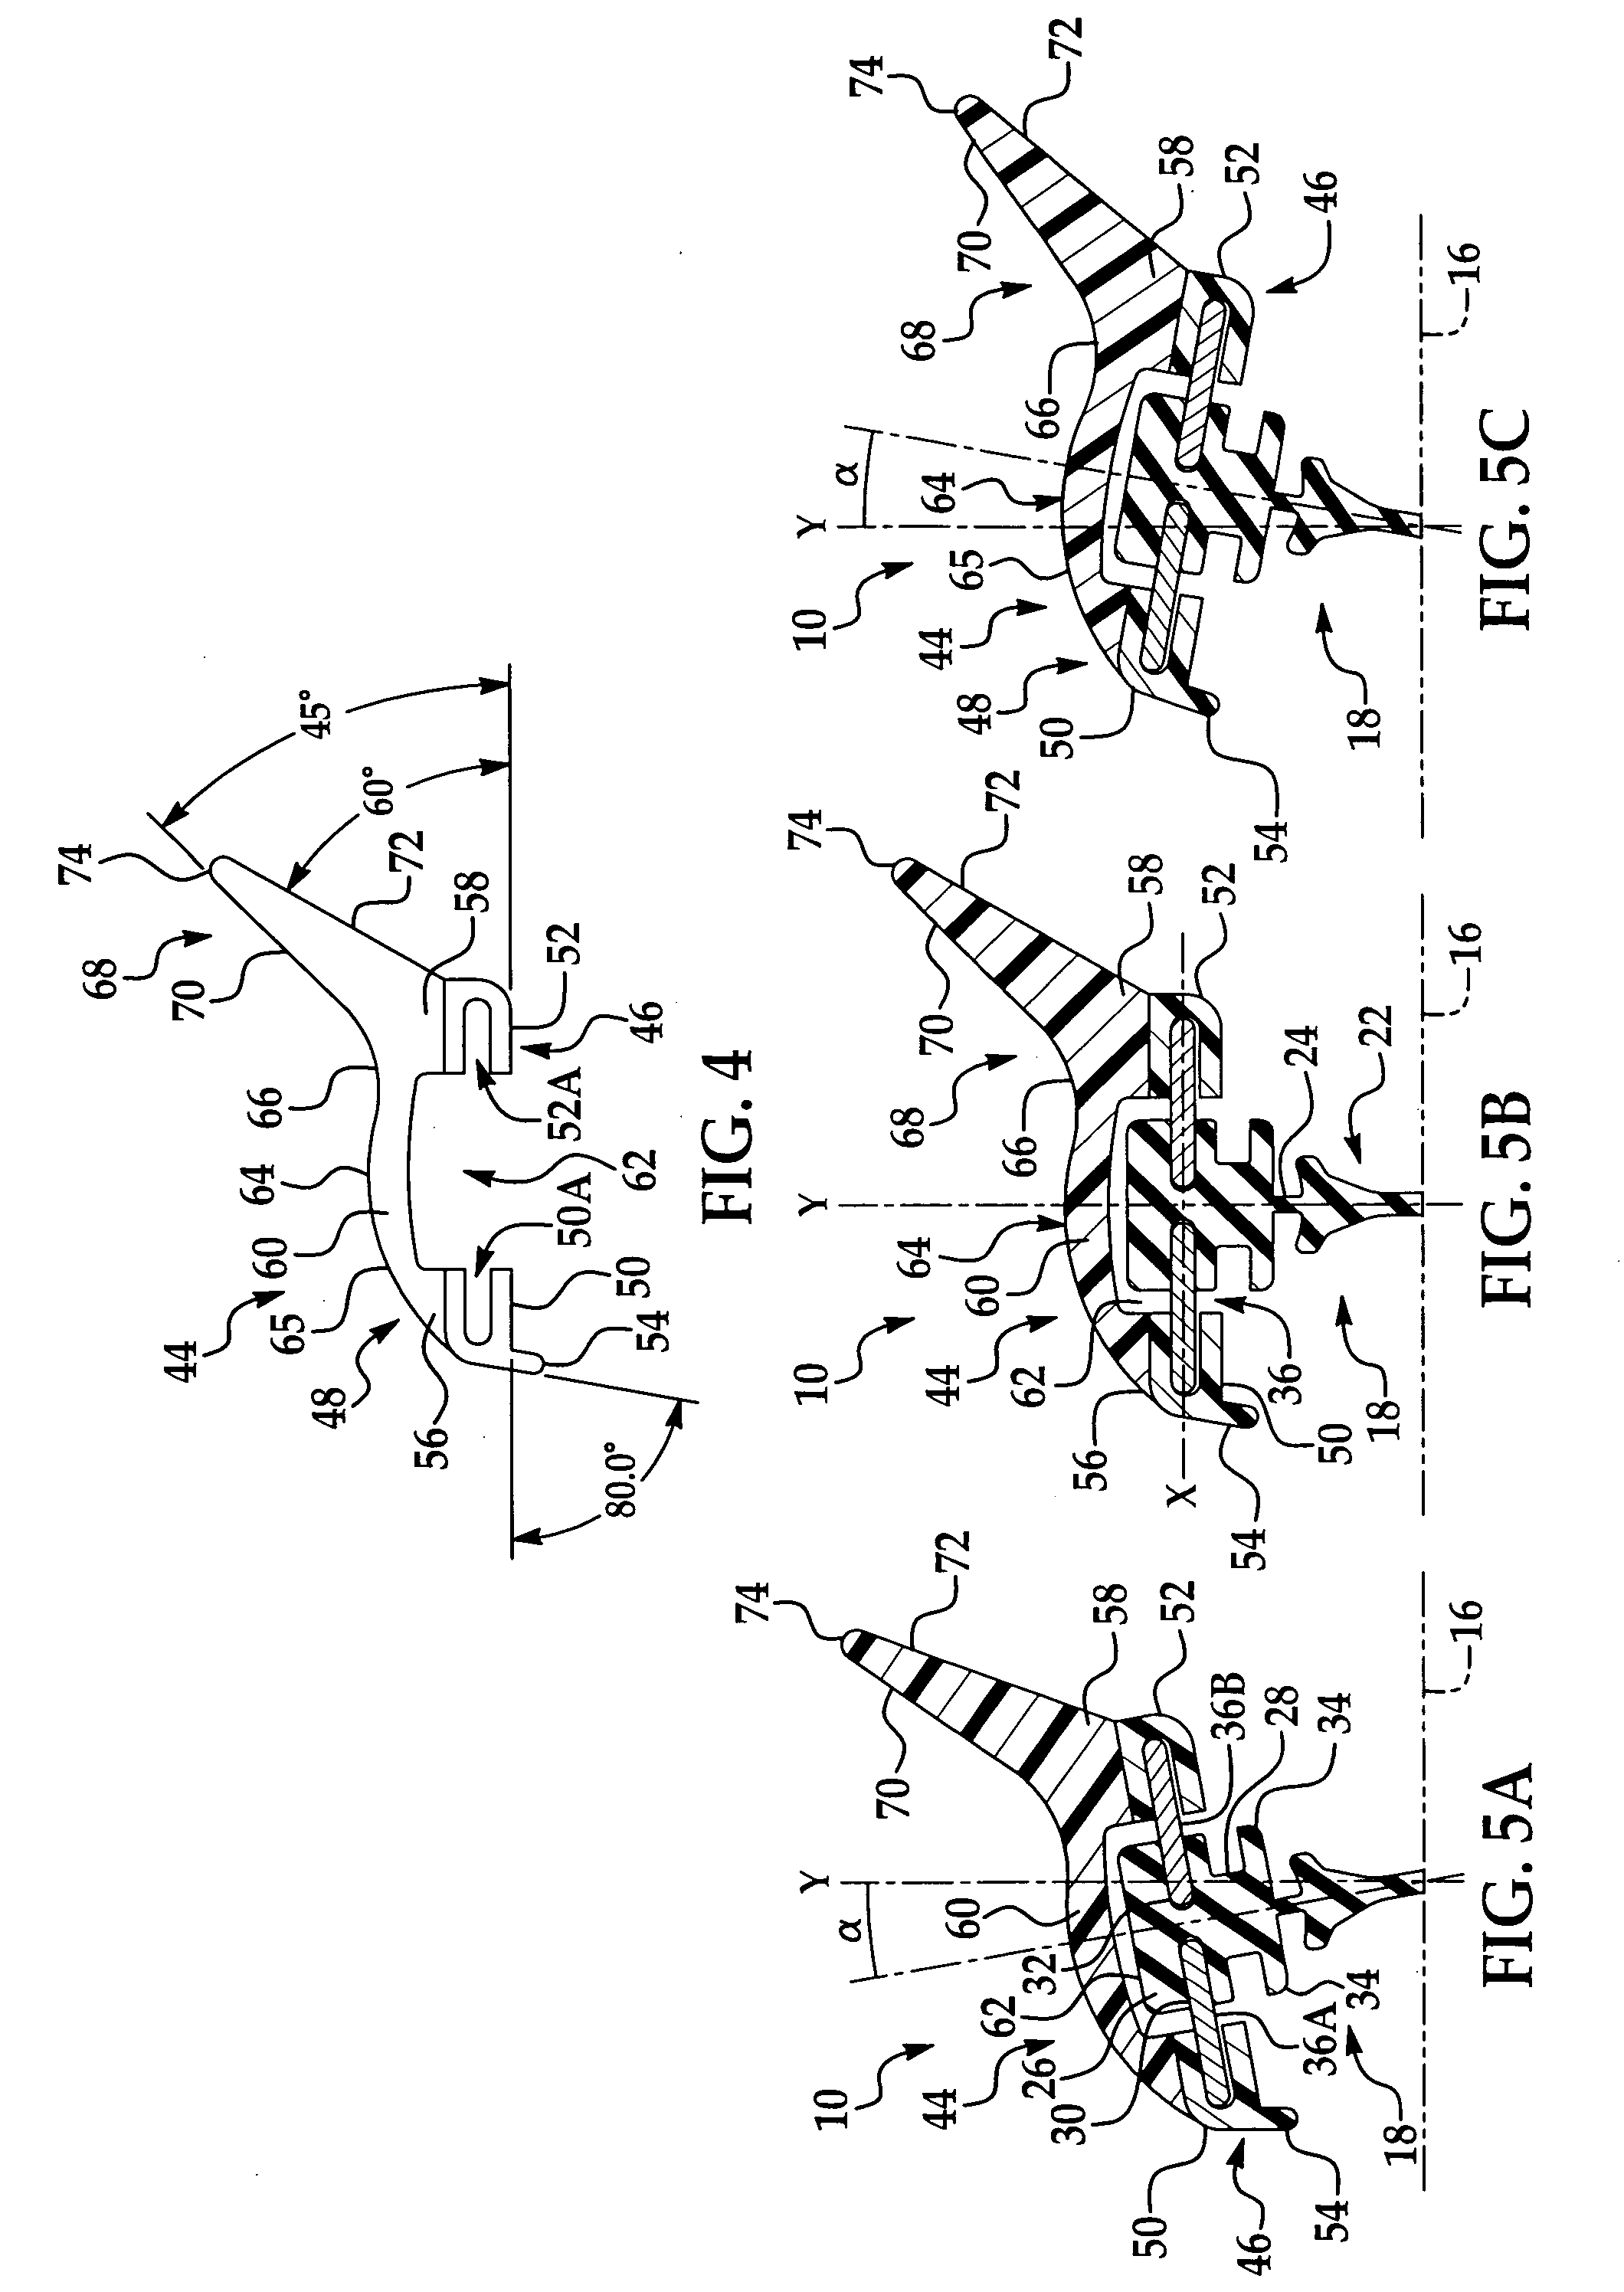 Windshield wiper assembly having an optimized airfoil